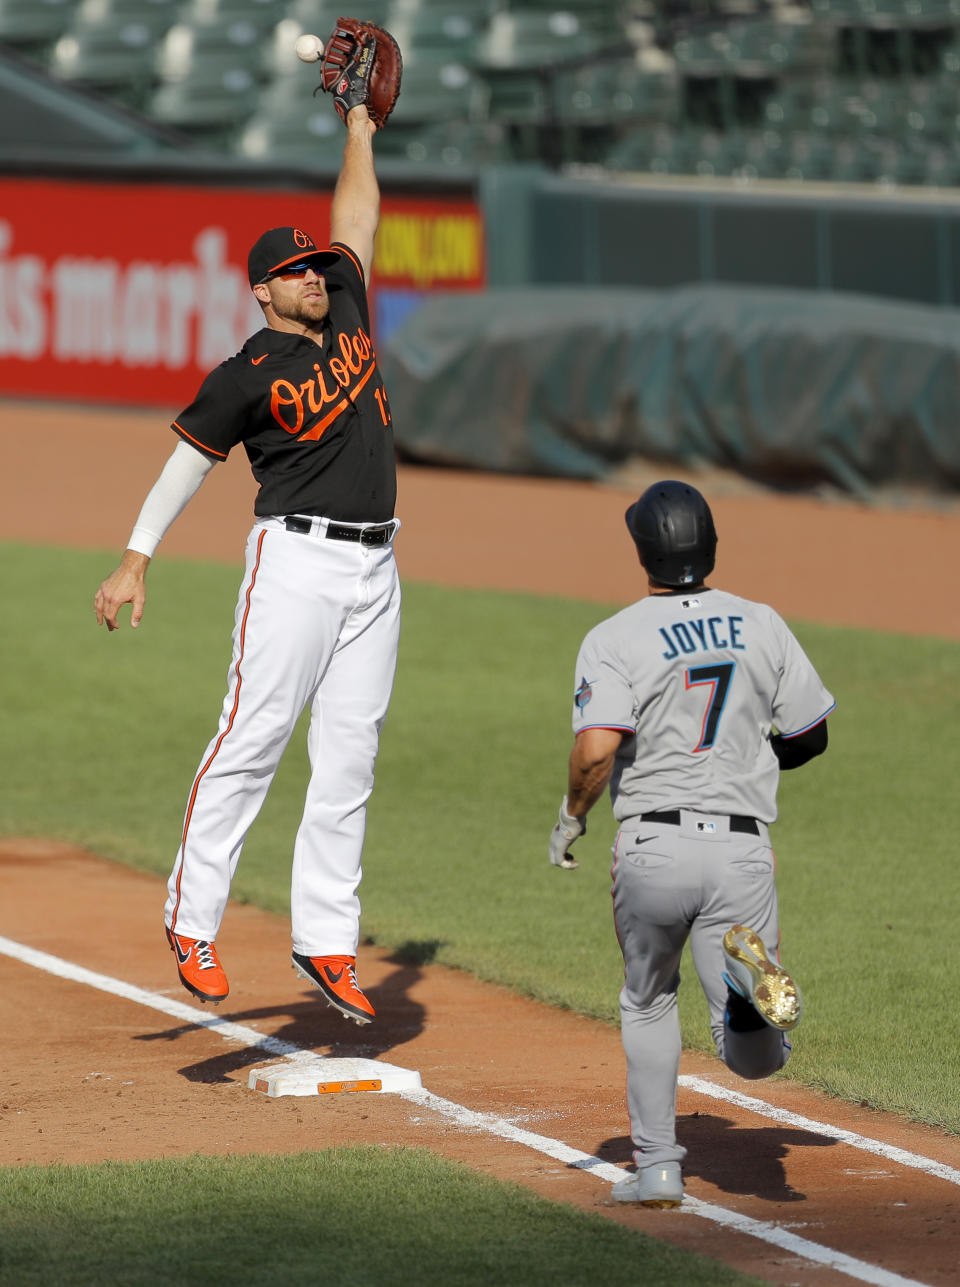 Baltimore Orioles first baseman Chris Davis, left, is unable to catch a high throw from starting pitcher Alex Cobb, not visible, on a dribbler hit by Miami Marlins' Matt Joyce (7) during the second inning in game one of a baseball double-header, Wednesday, Aug. 5, 2020, in Baltimore. (AP Photo/Julio Cortez)